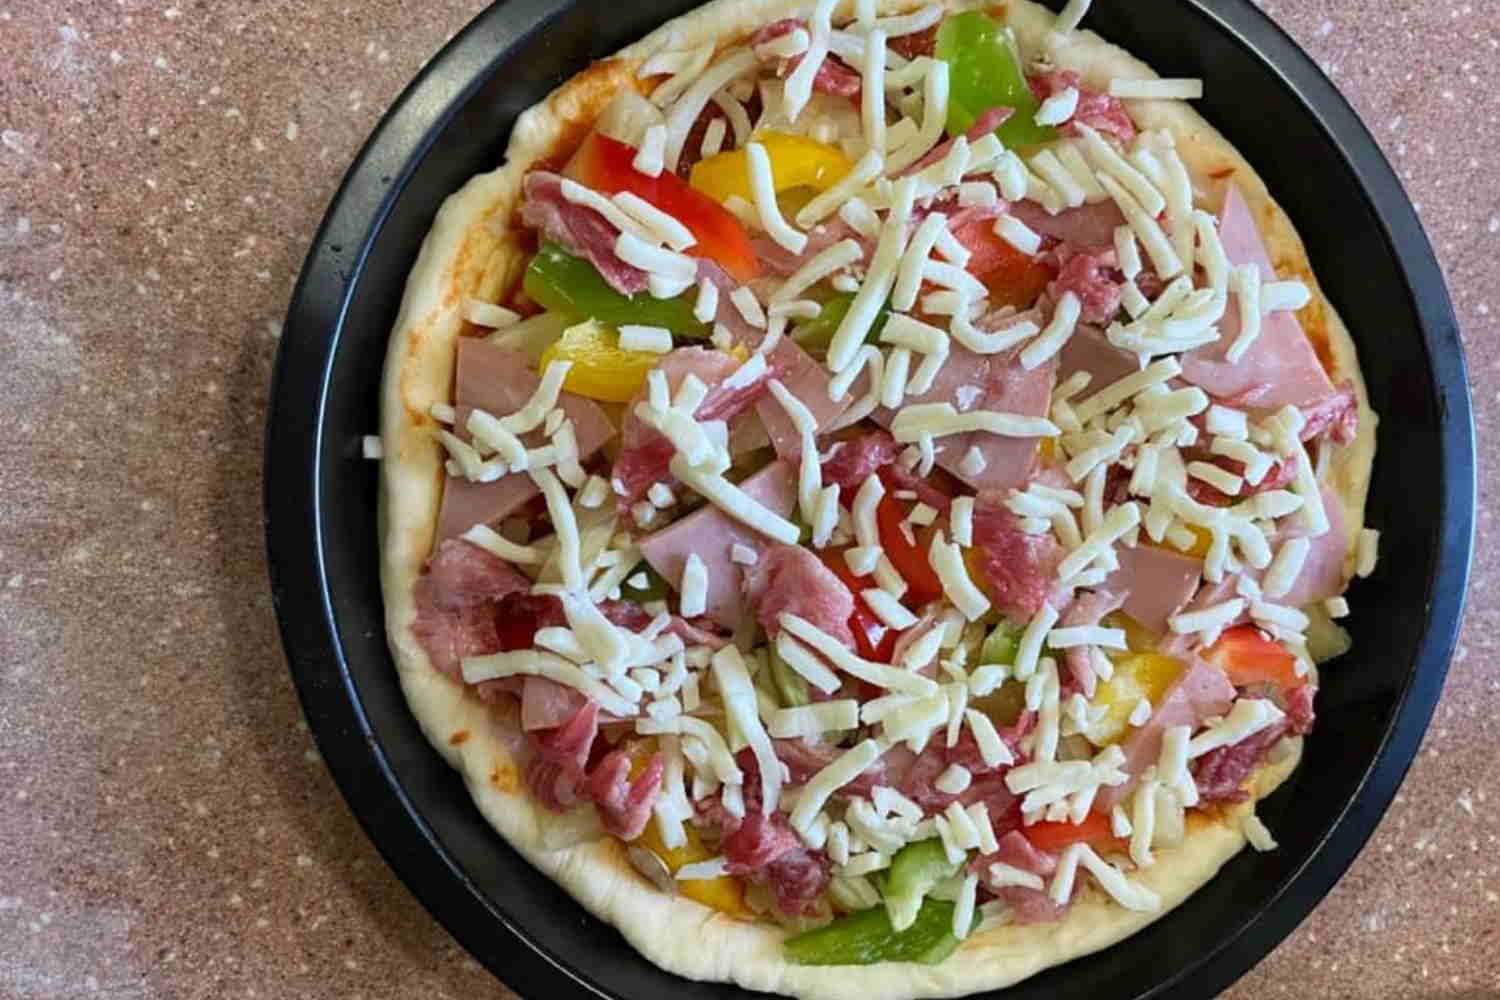 Common topping for homemade pizza